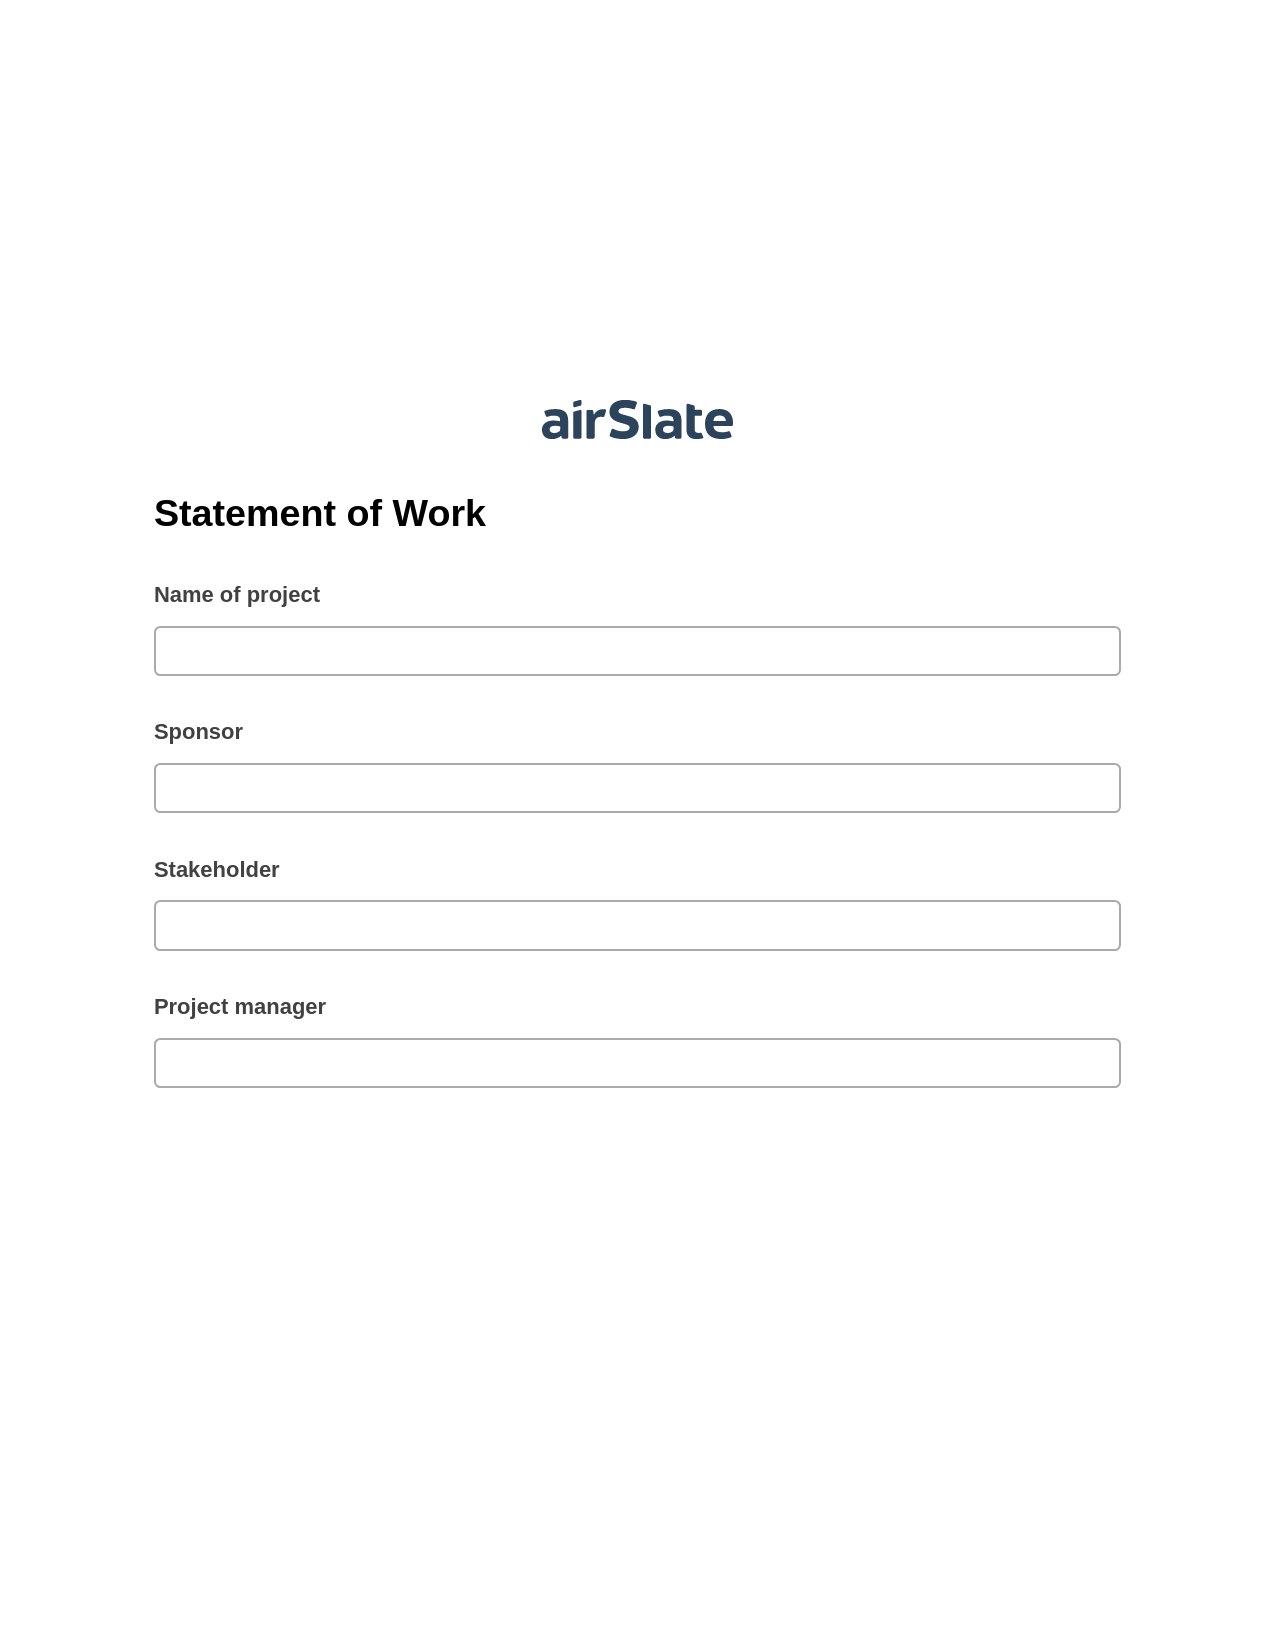 Multirole Statement of Work Pre-fill Document Bot, Lock the slate bot, Archive to SharePoint Folder Bot